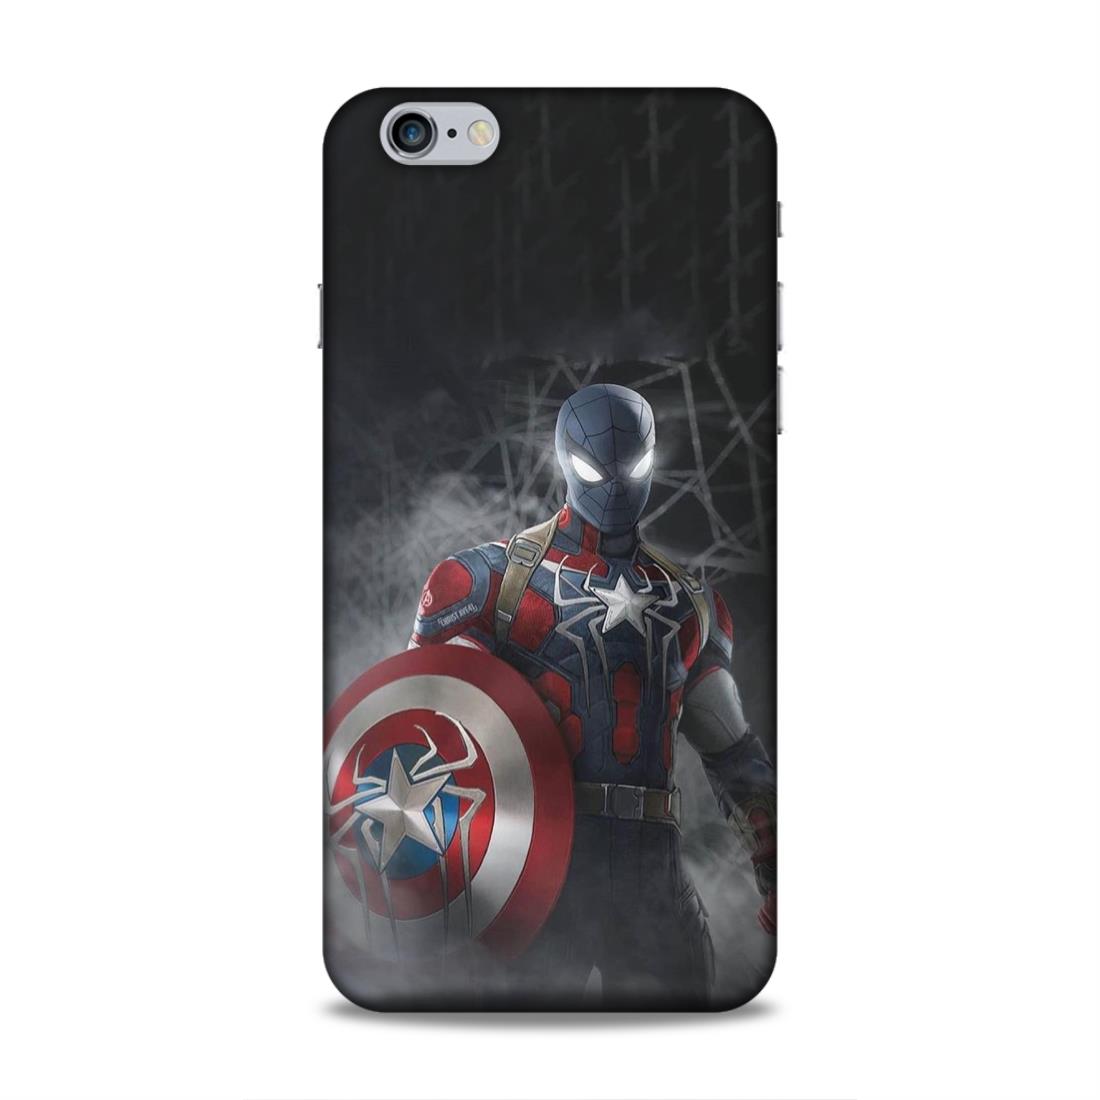 Spiderman With Shild Hard Back Case For Apple iPhone 6 Plus / 6s Plus